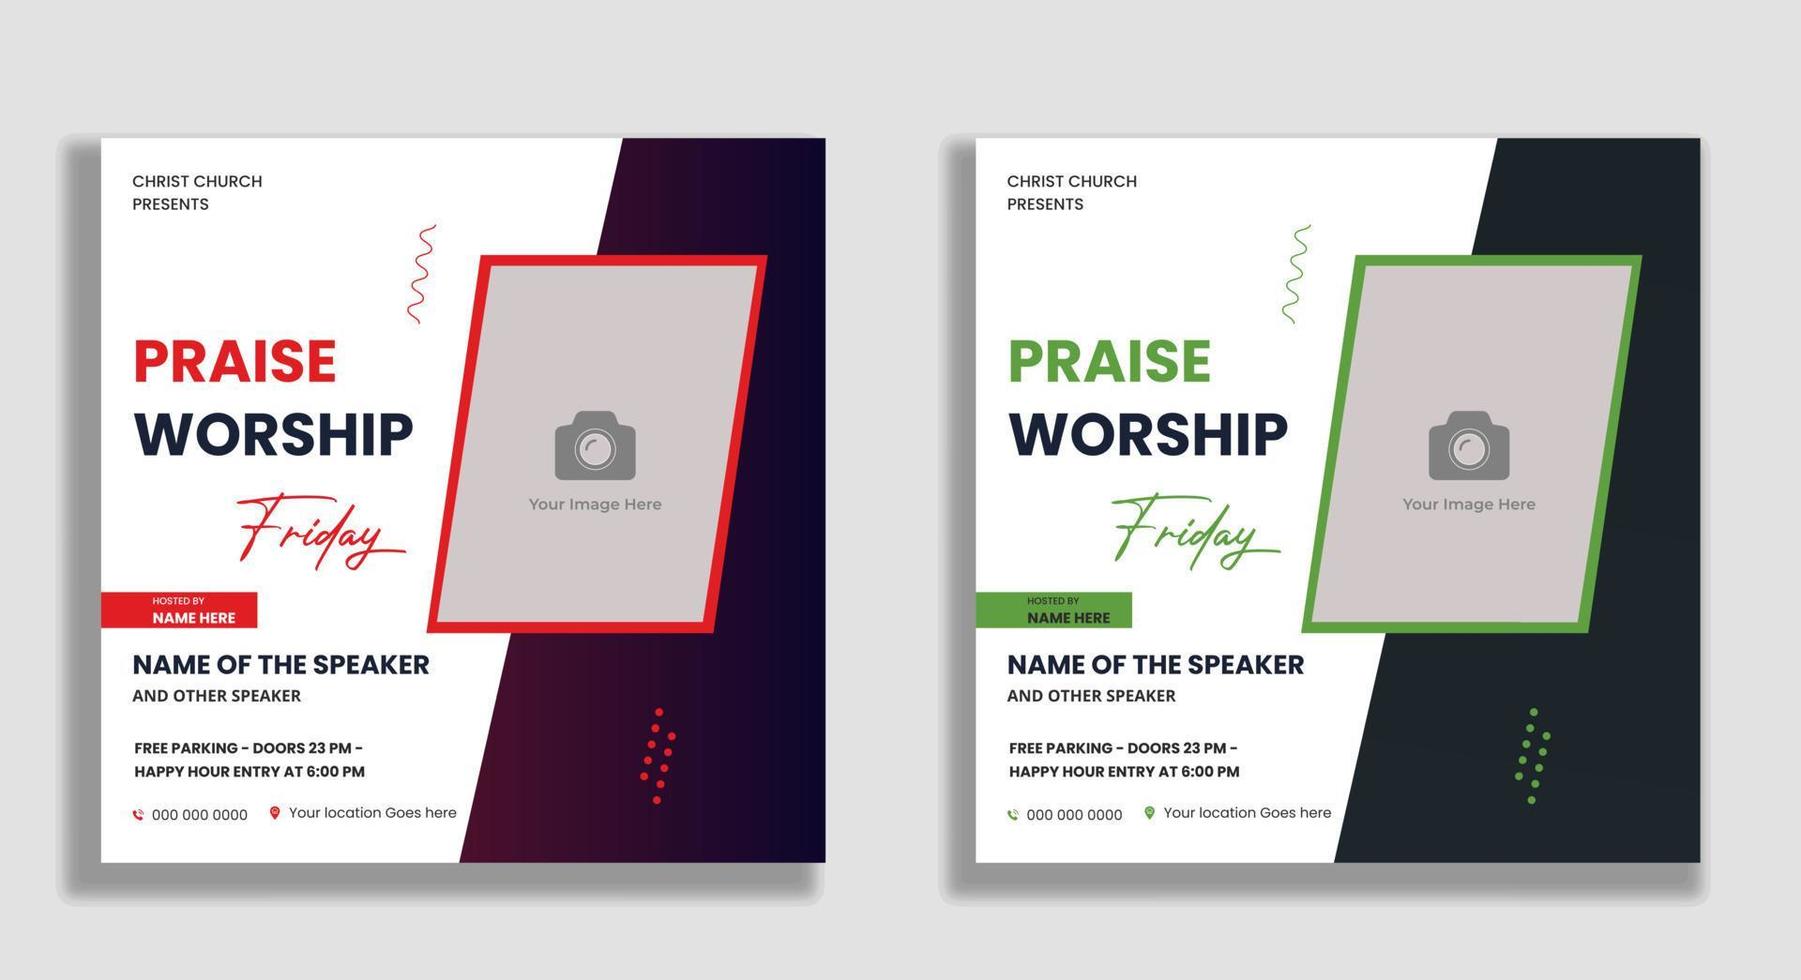 Church worship conference flyer social media post and web banner template vector